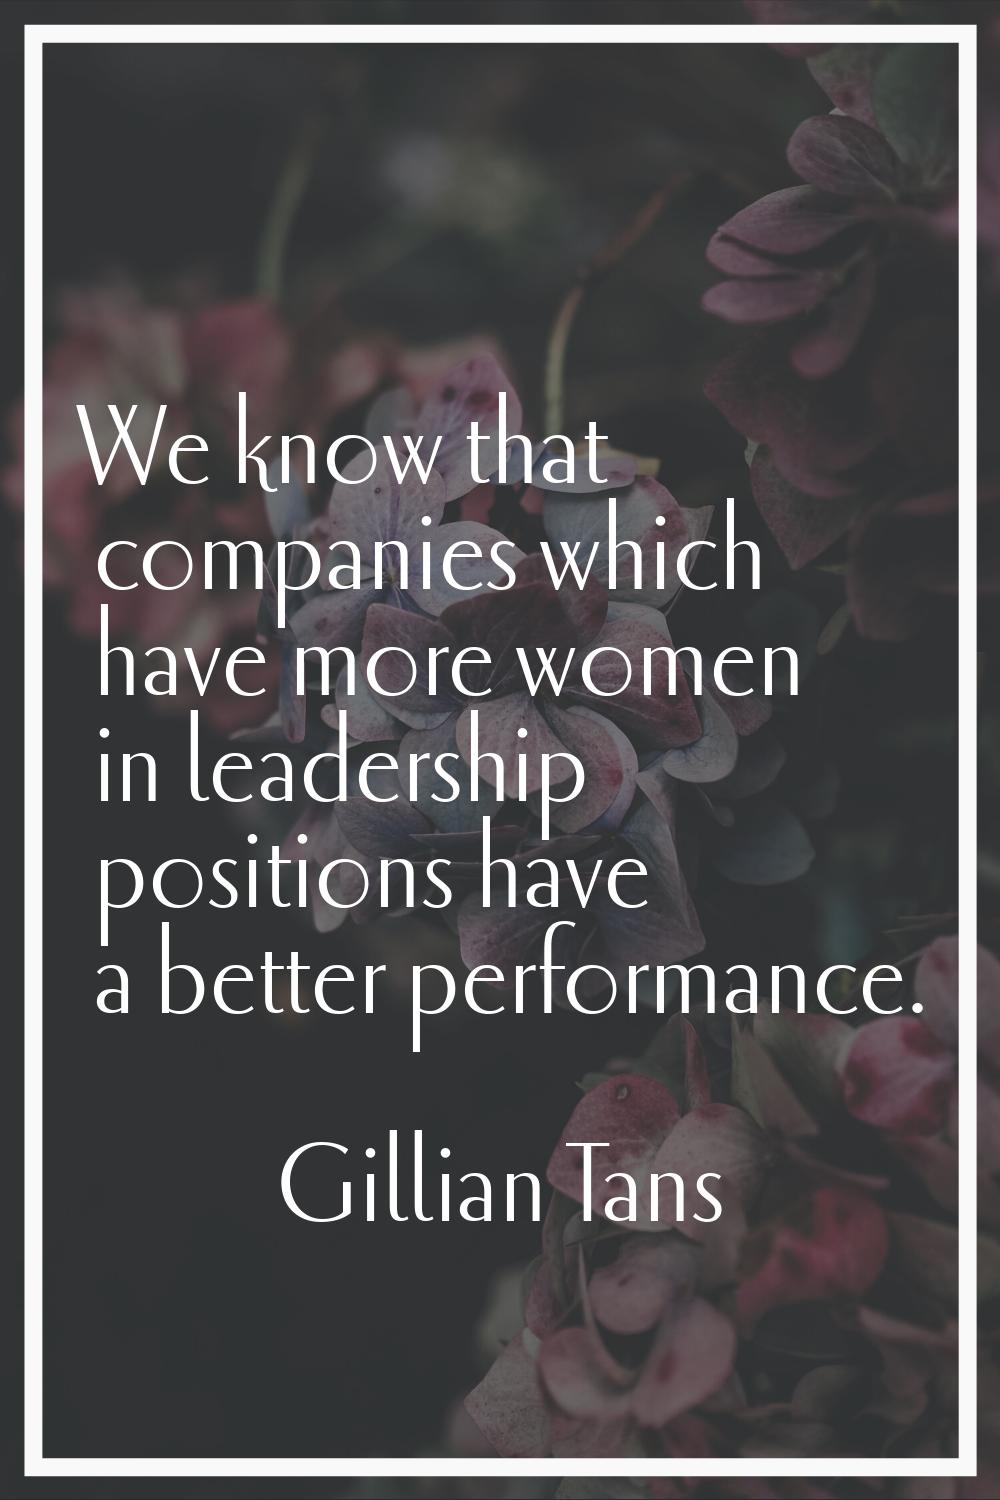 We know that companies which have more women in leadership positions have a better performance.